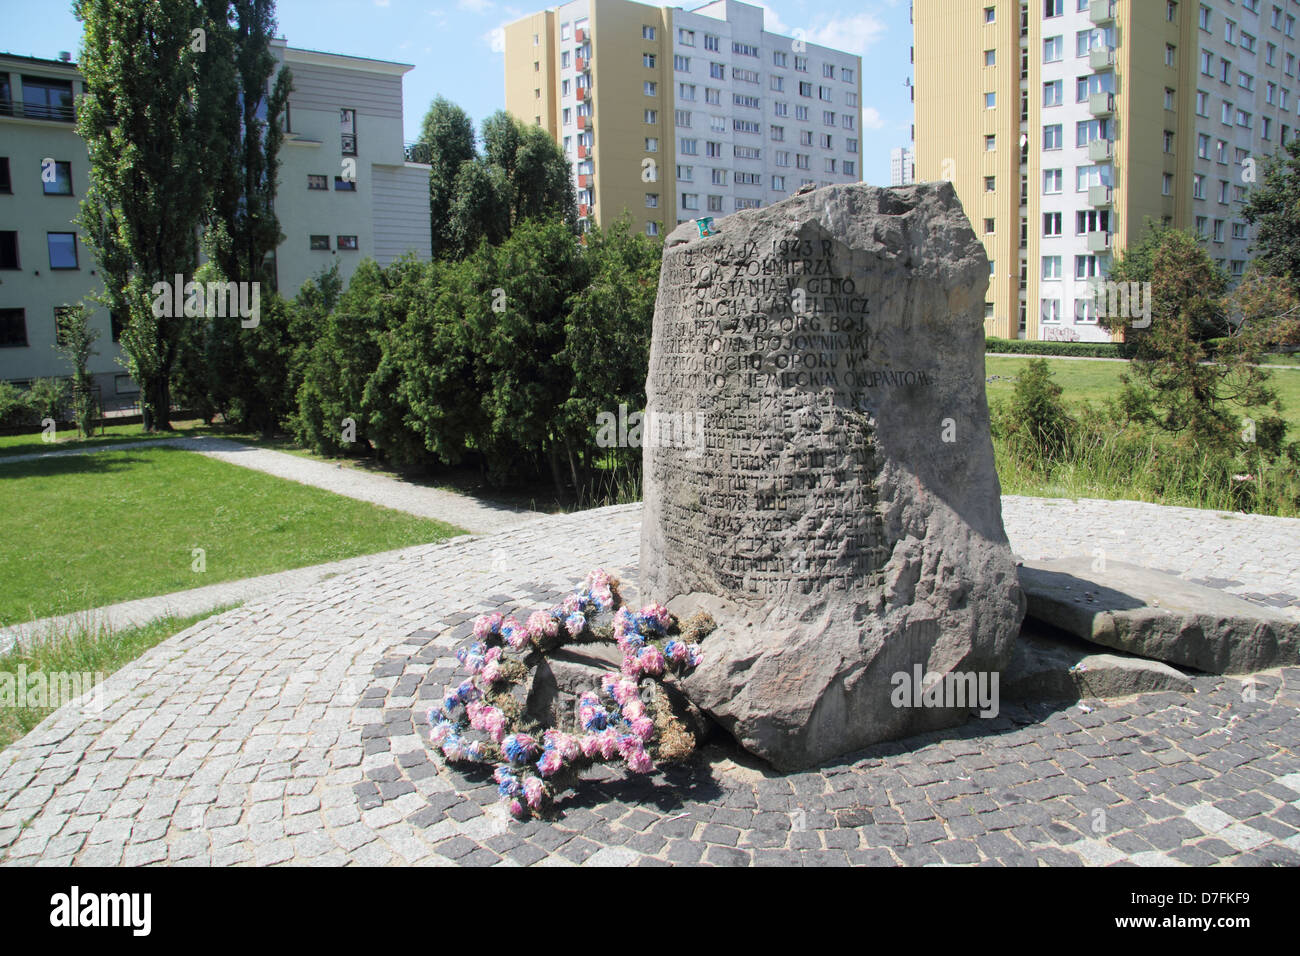 Memorial site where Mila 18 building existed in the Warsaw Ghetto, Poland Stock Photo